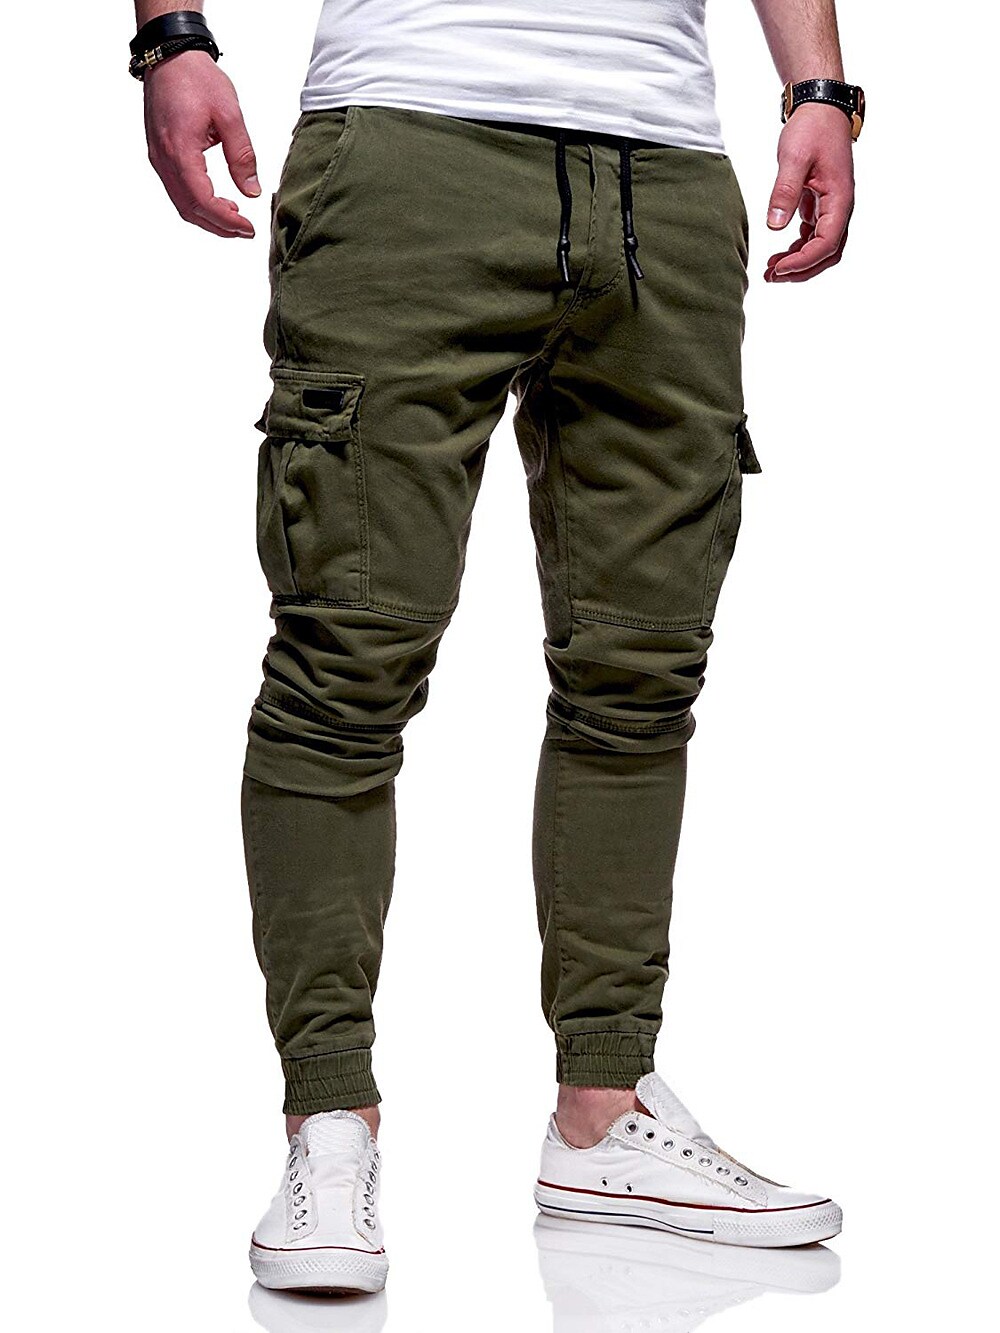 Men's Sport Solid Color Breathable Quick Dry Joggers Cargo Pants